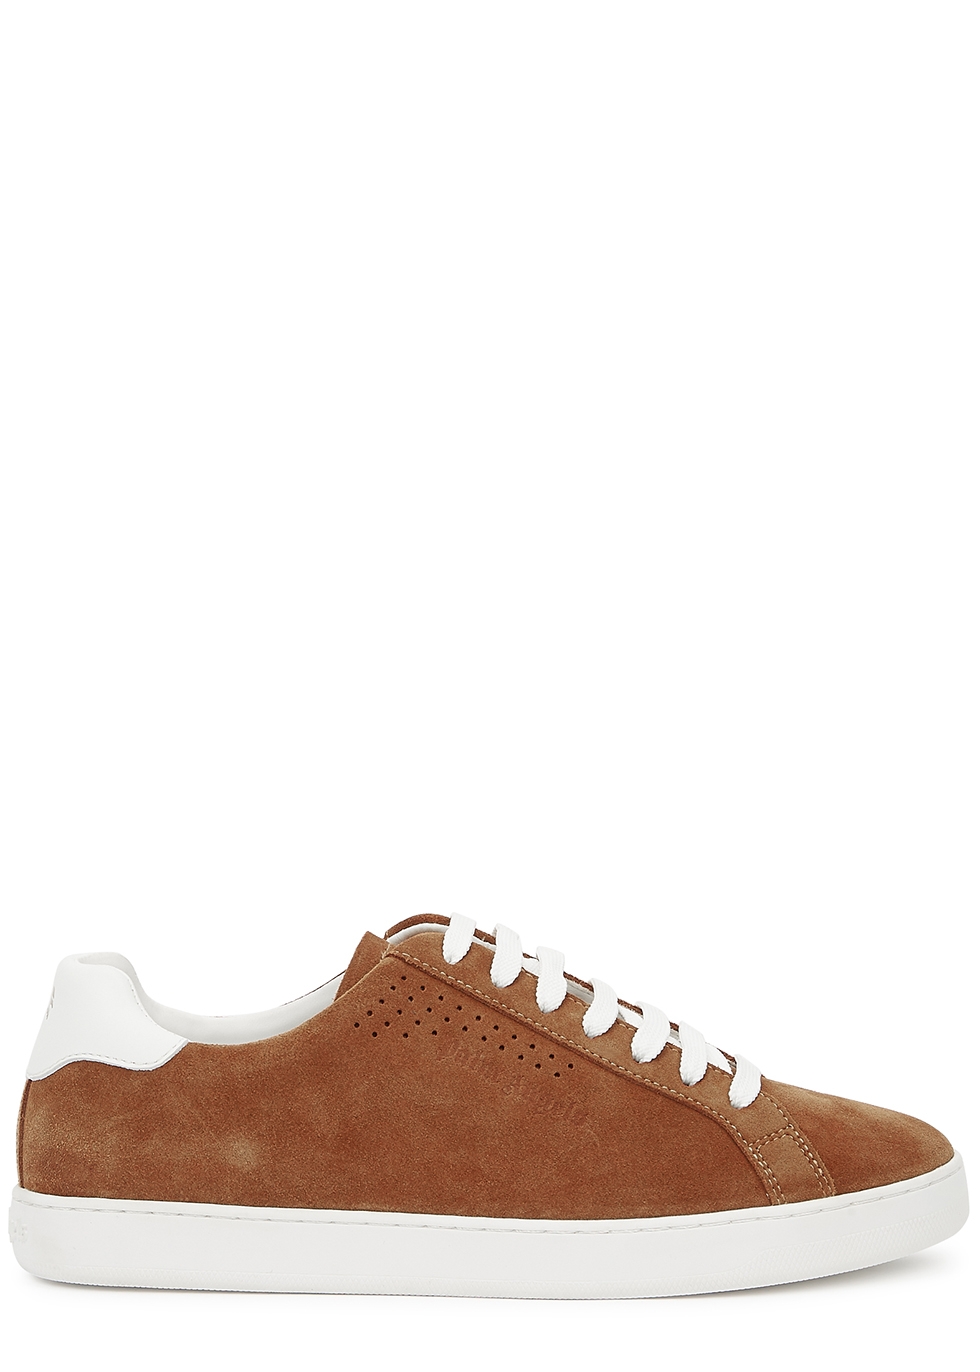 Palm 1 brown suede sneakers